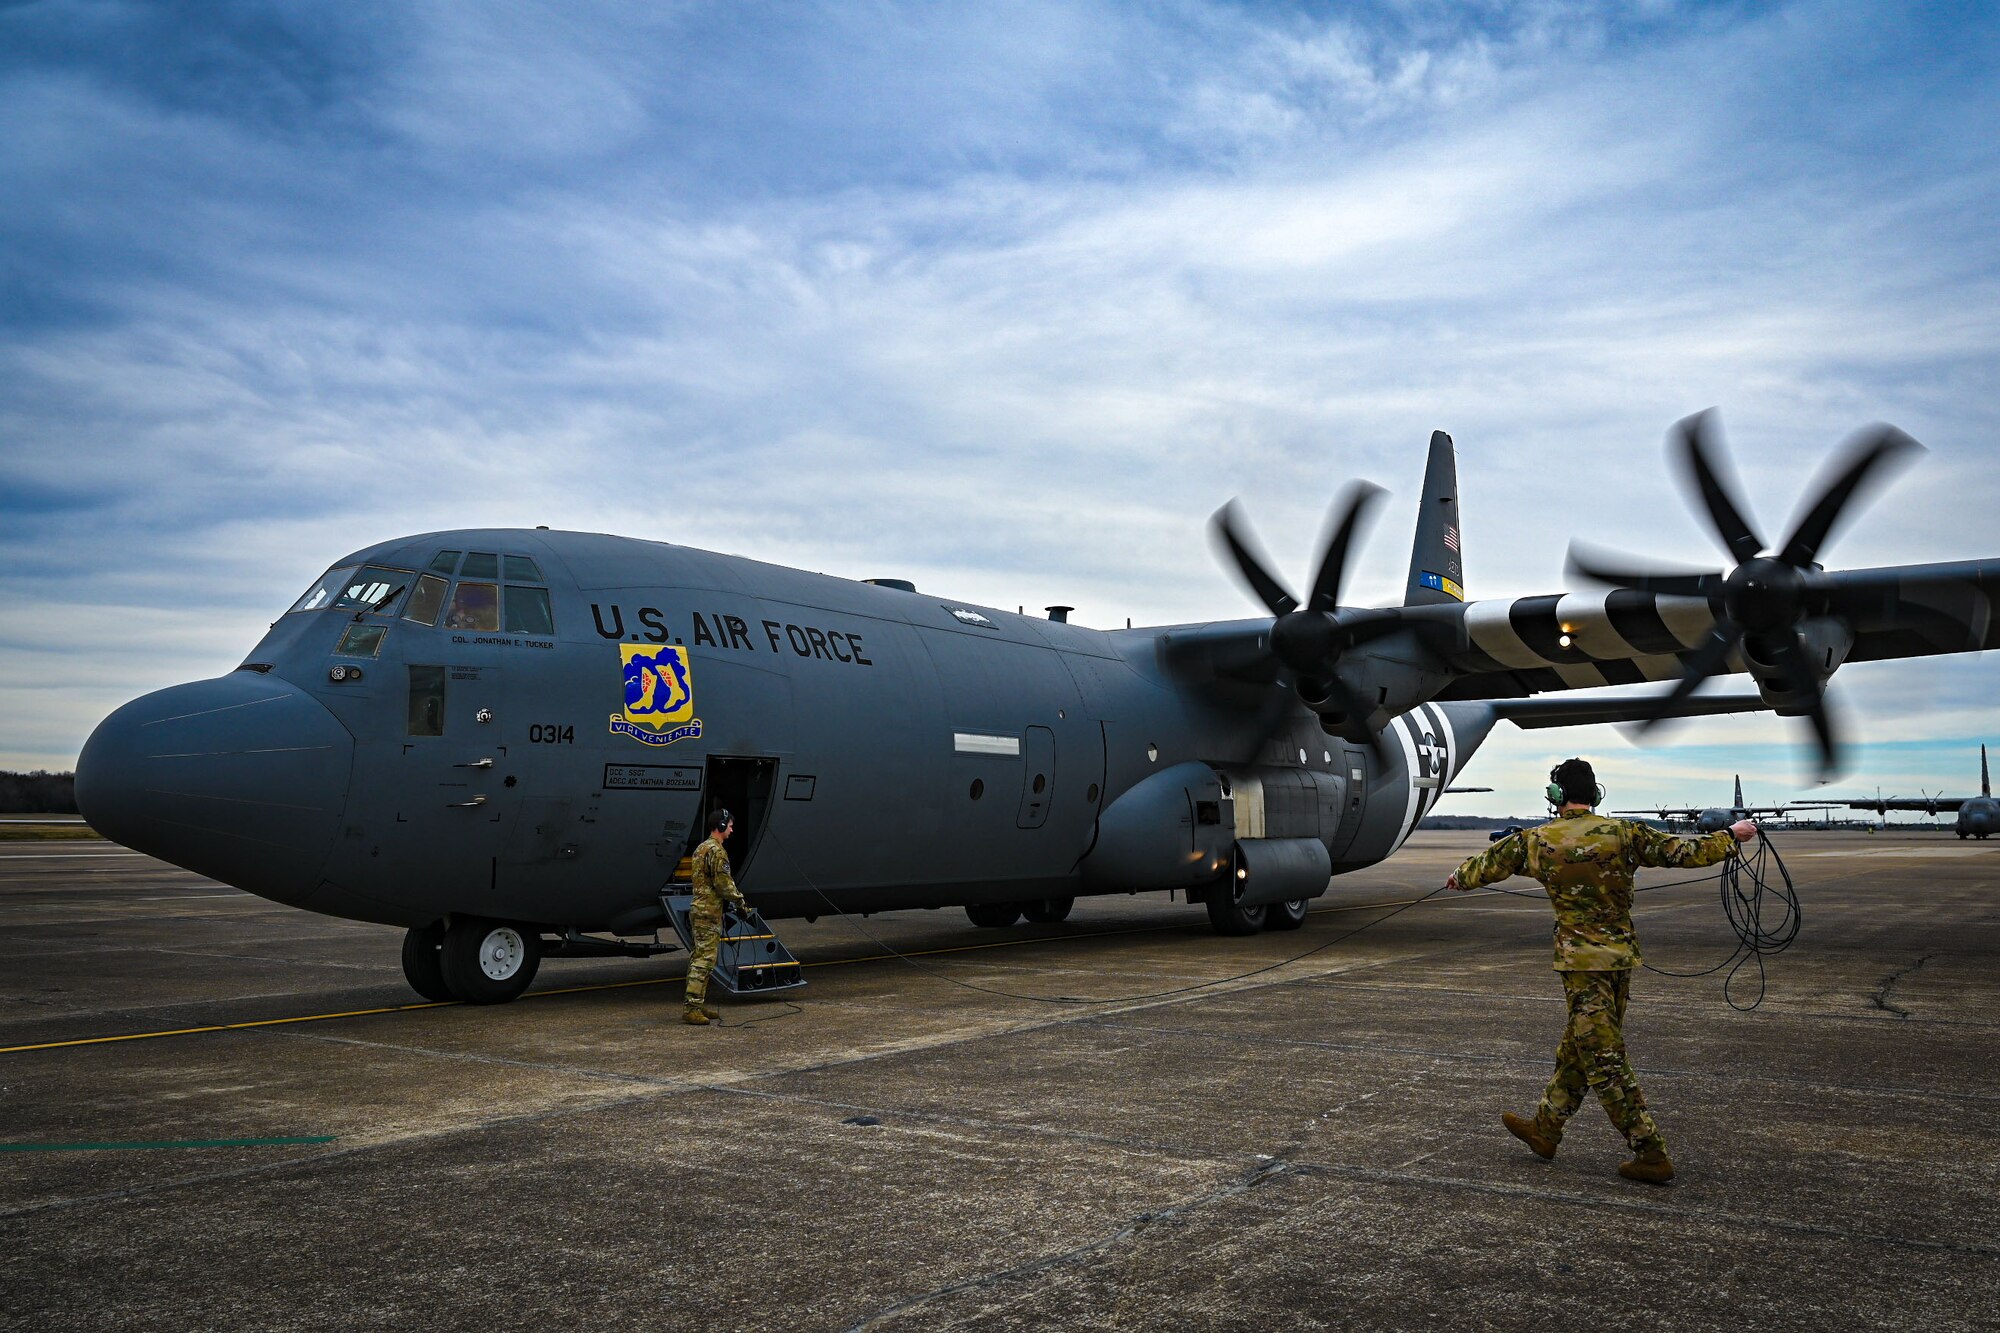 Two Airmen wrapping a cord in front of a C-130J Super Hercules aircraft